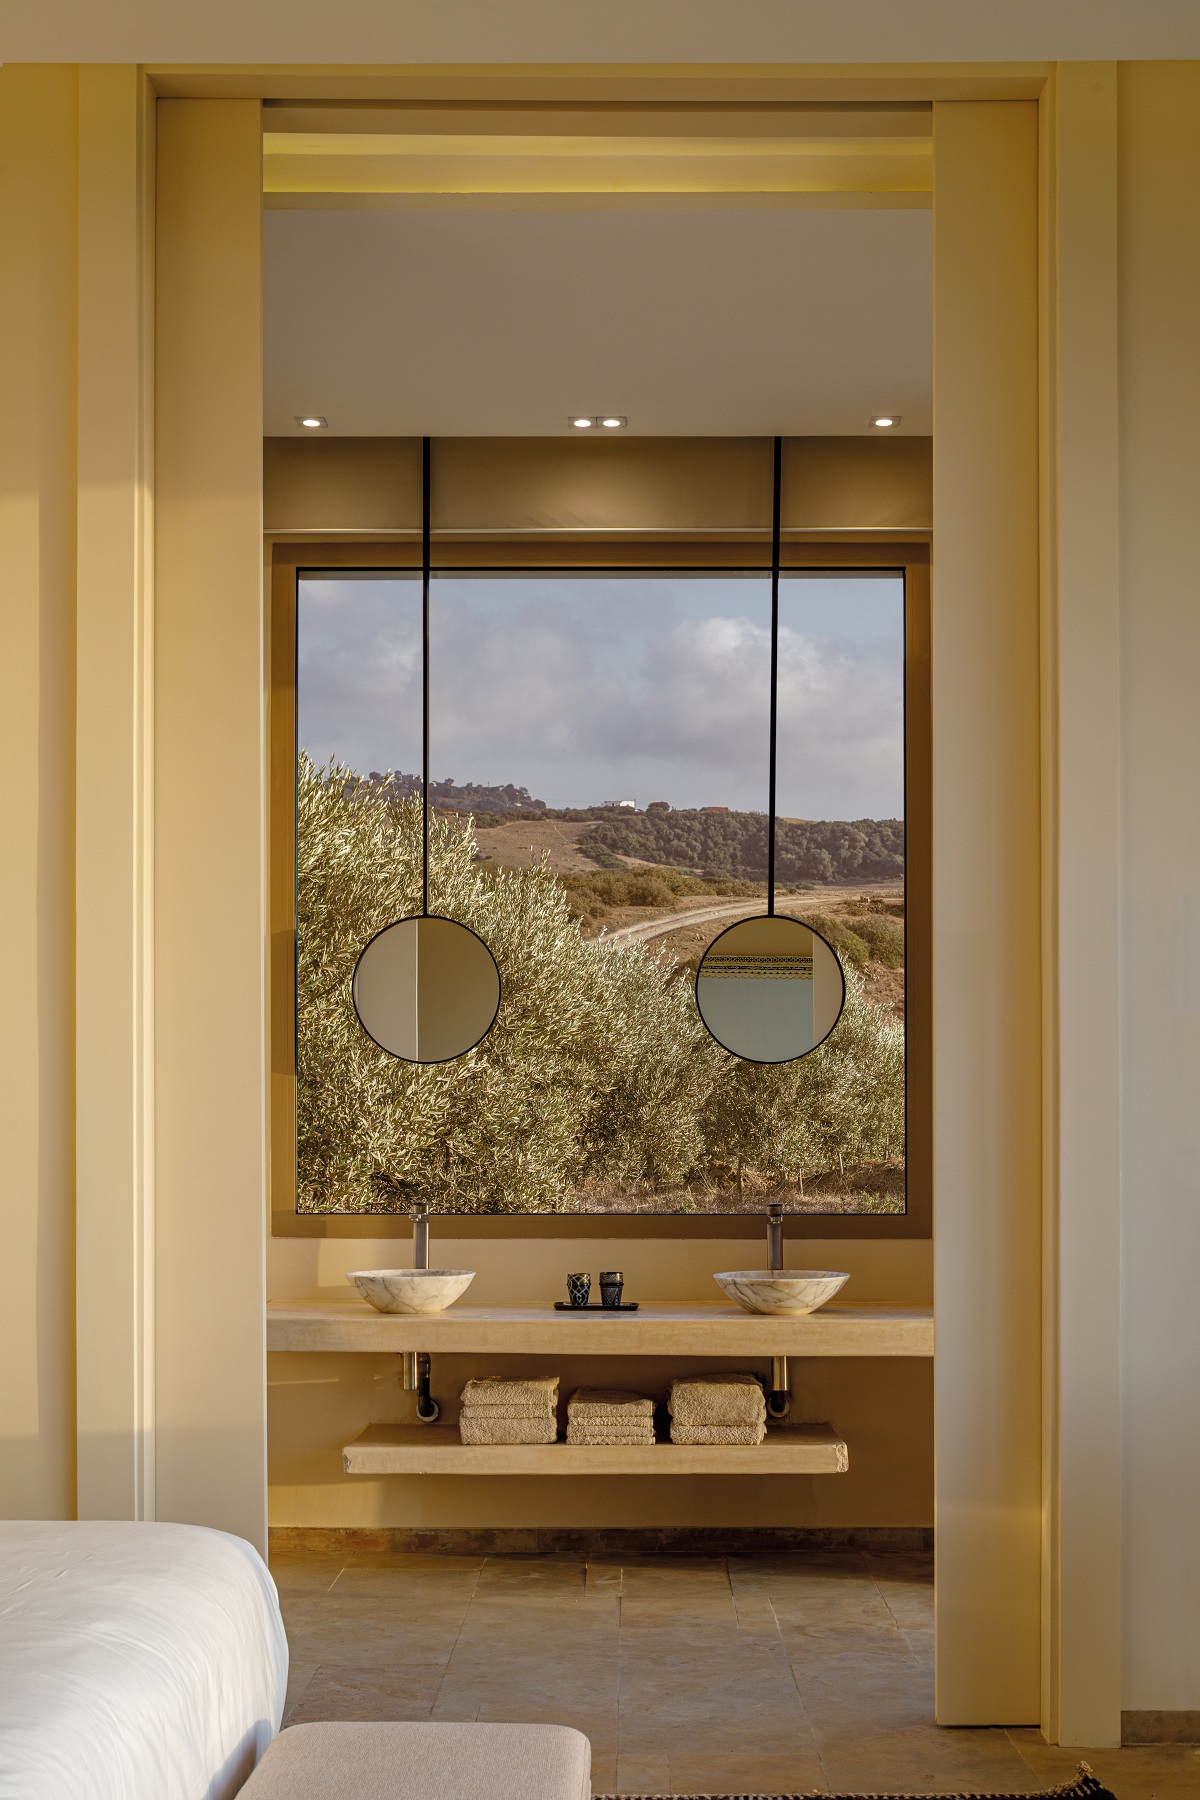 two round mirrors suspended in front of window in the bathroom with view over olive groves